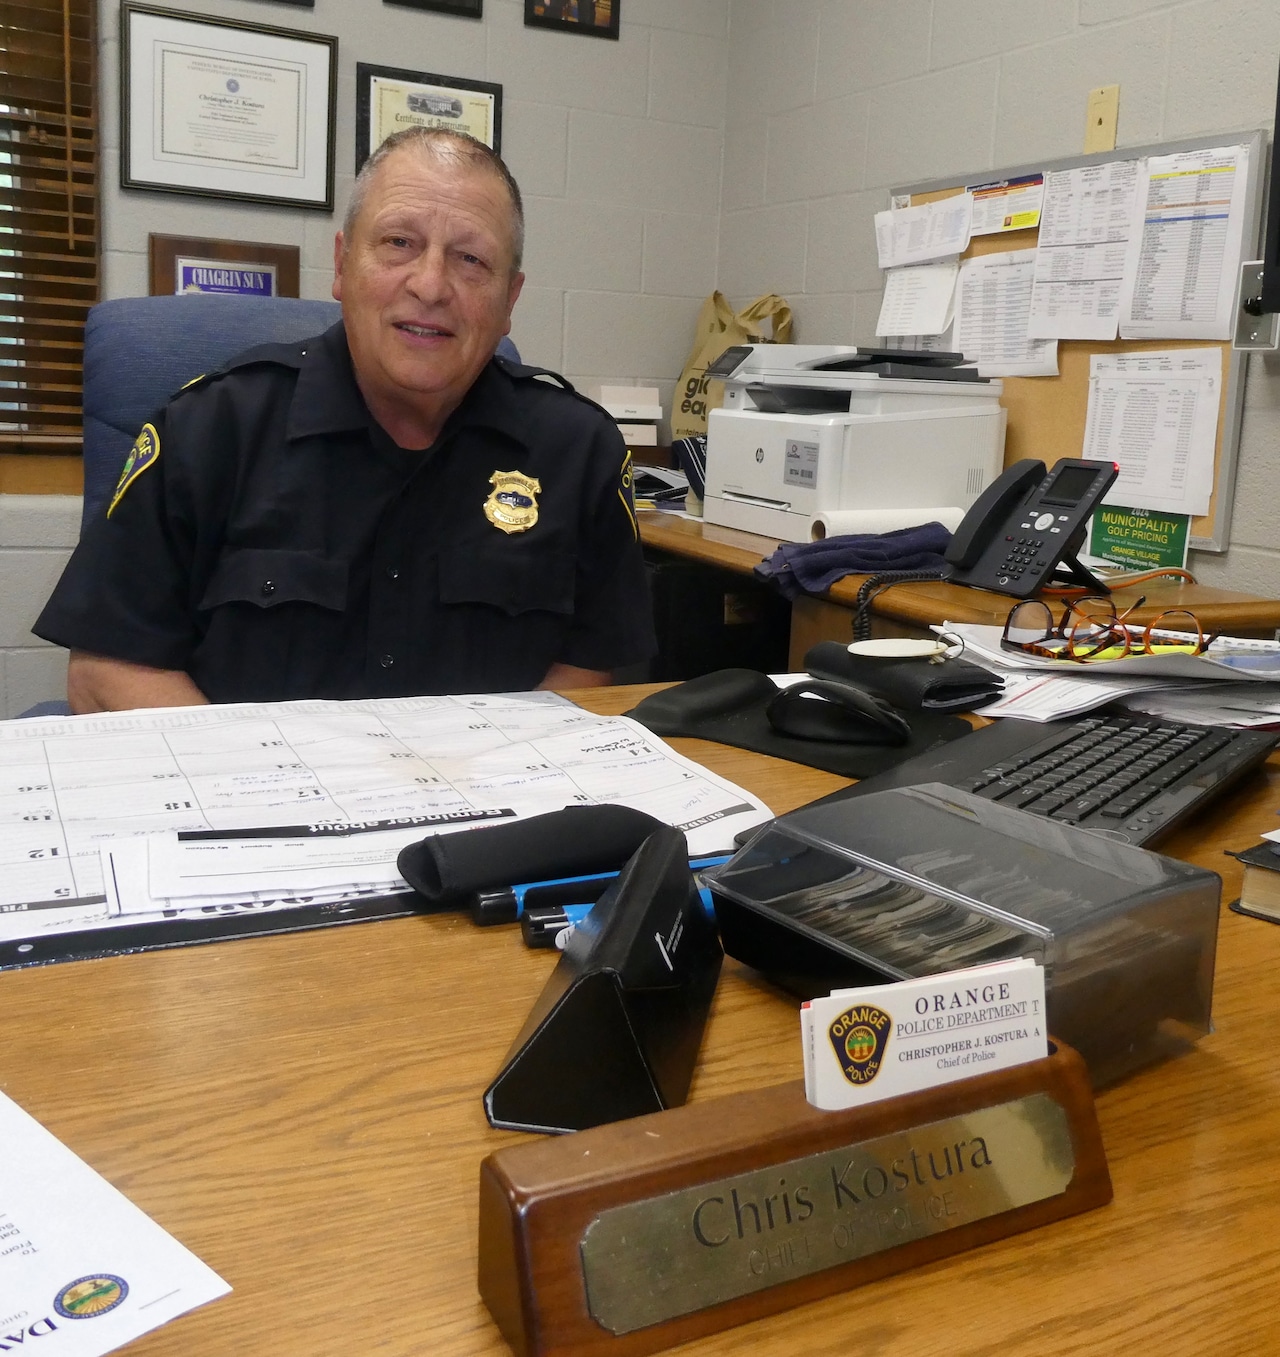 Orange Police Chief Chris Kostura says hes looking forward to retirement [Video]